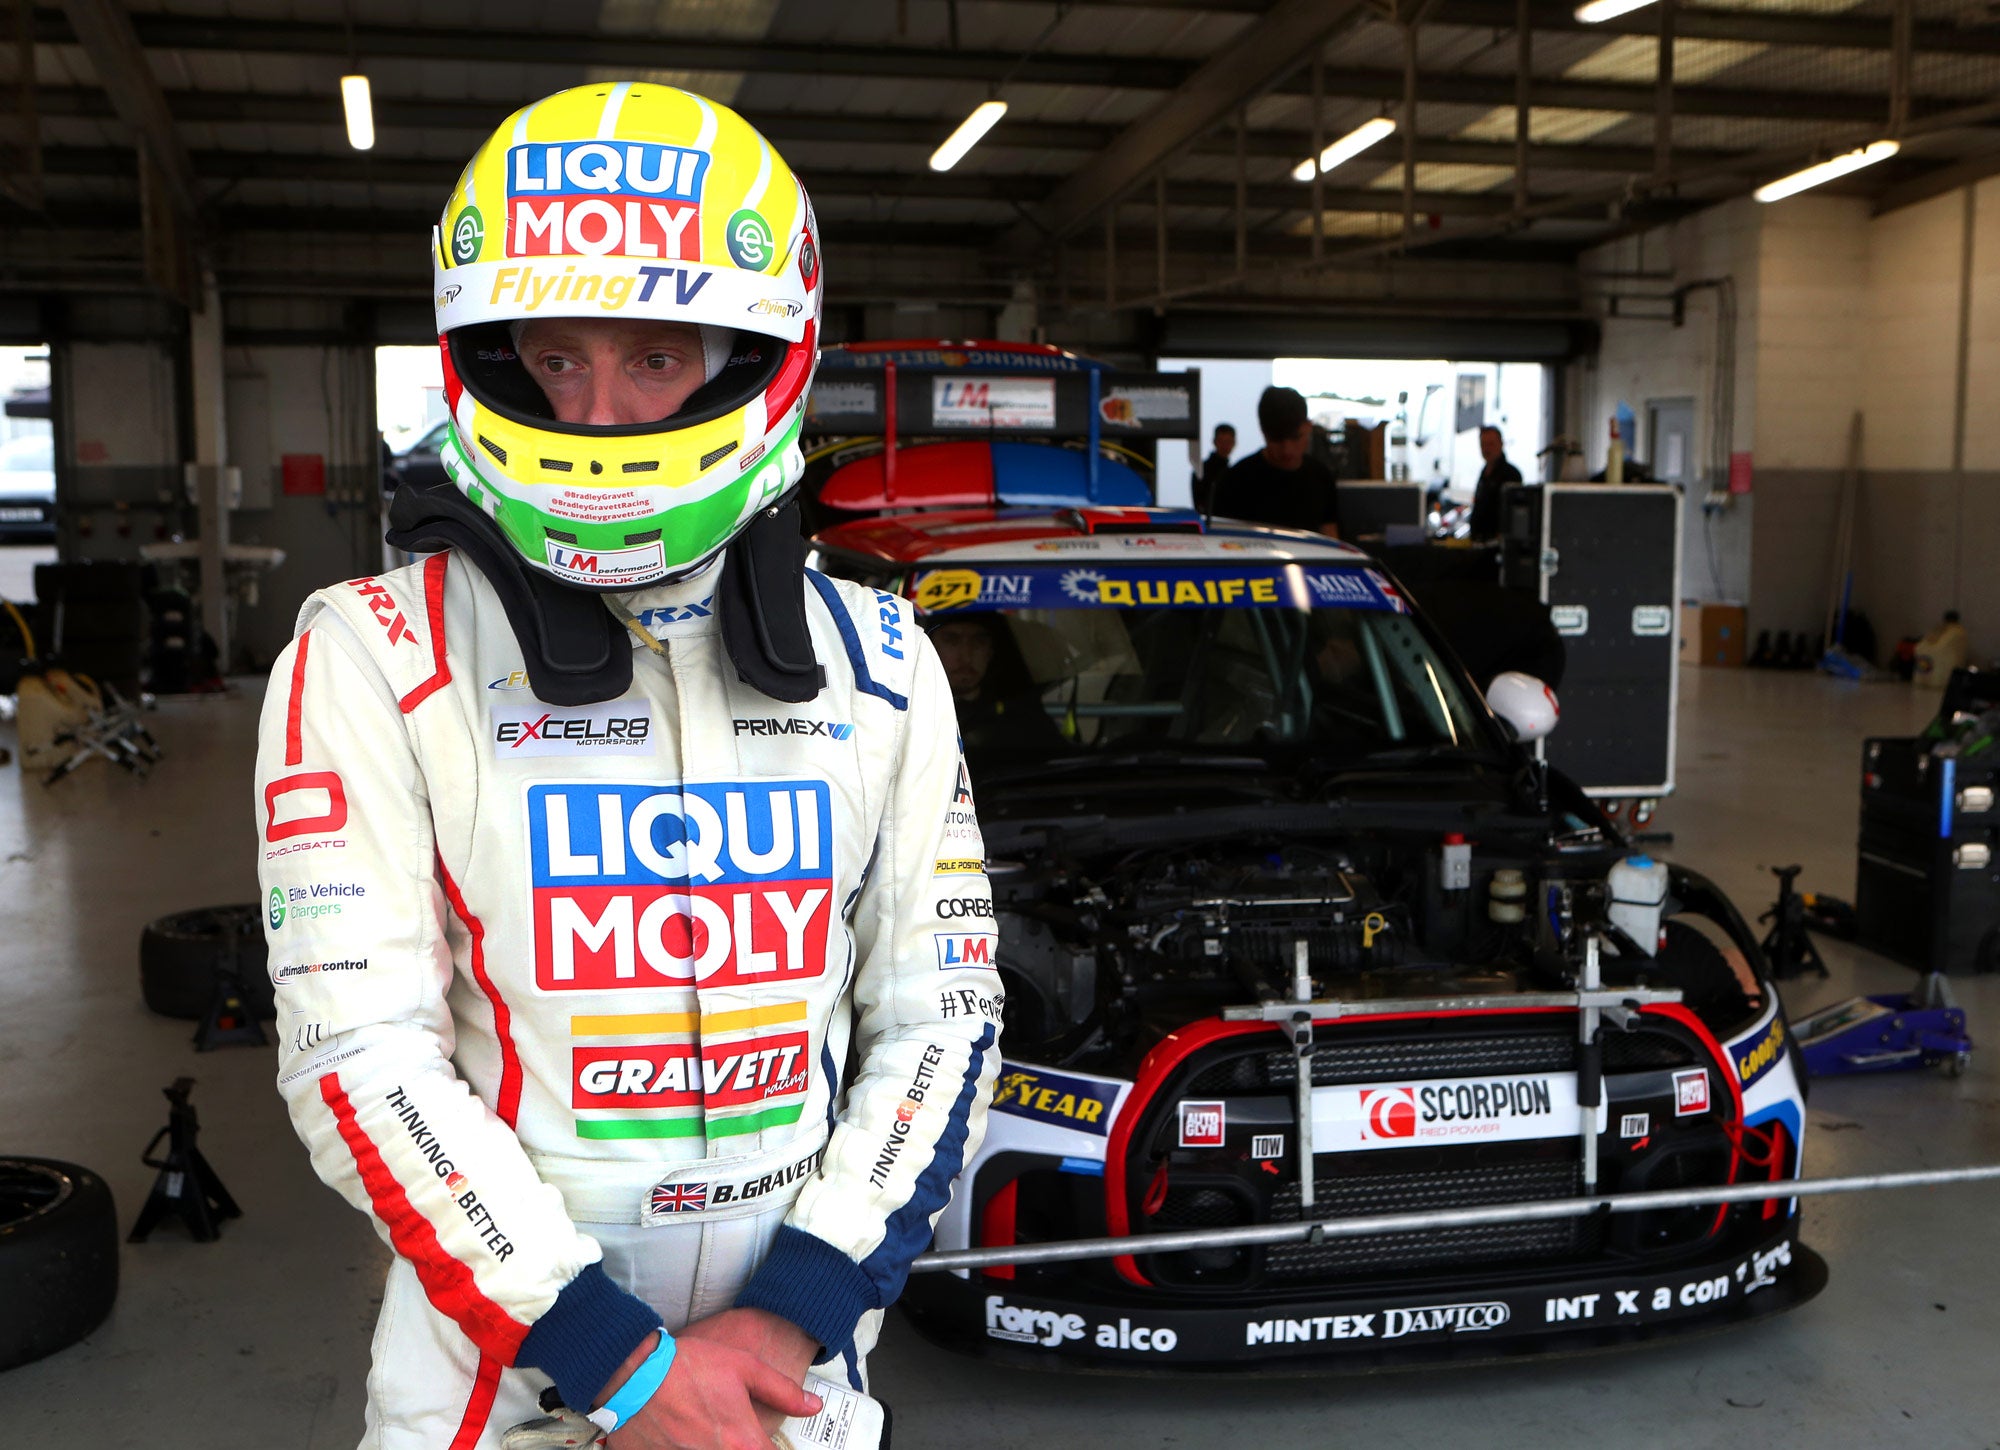 Bradley Gravett son of BTCC British Touring Car Champion Robb Gravett in the MINI Challenge JCW Series at Silverstone with EXCELR8 Motorsport Brad standing in front of car Cooper Racing Driver LIQUI MOLY LM Performance Thinking it Better